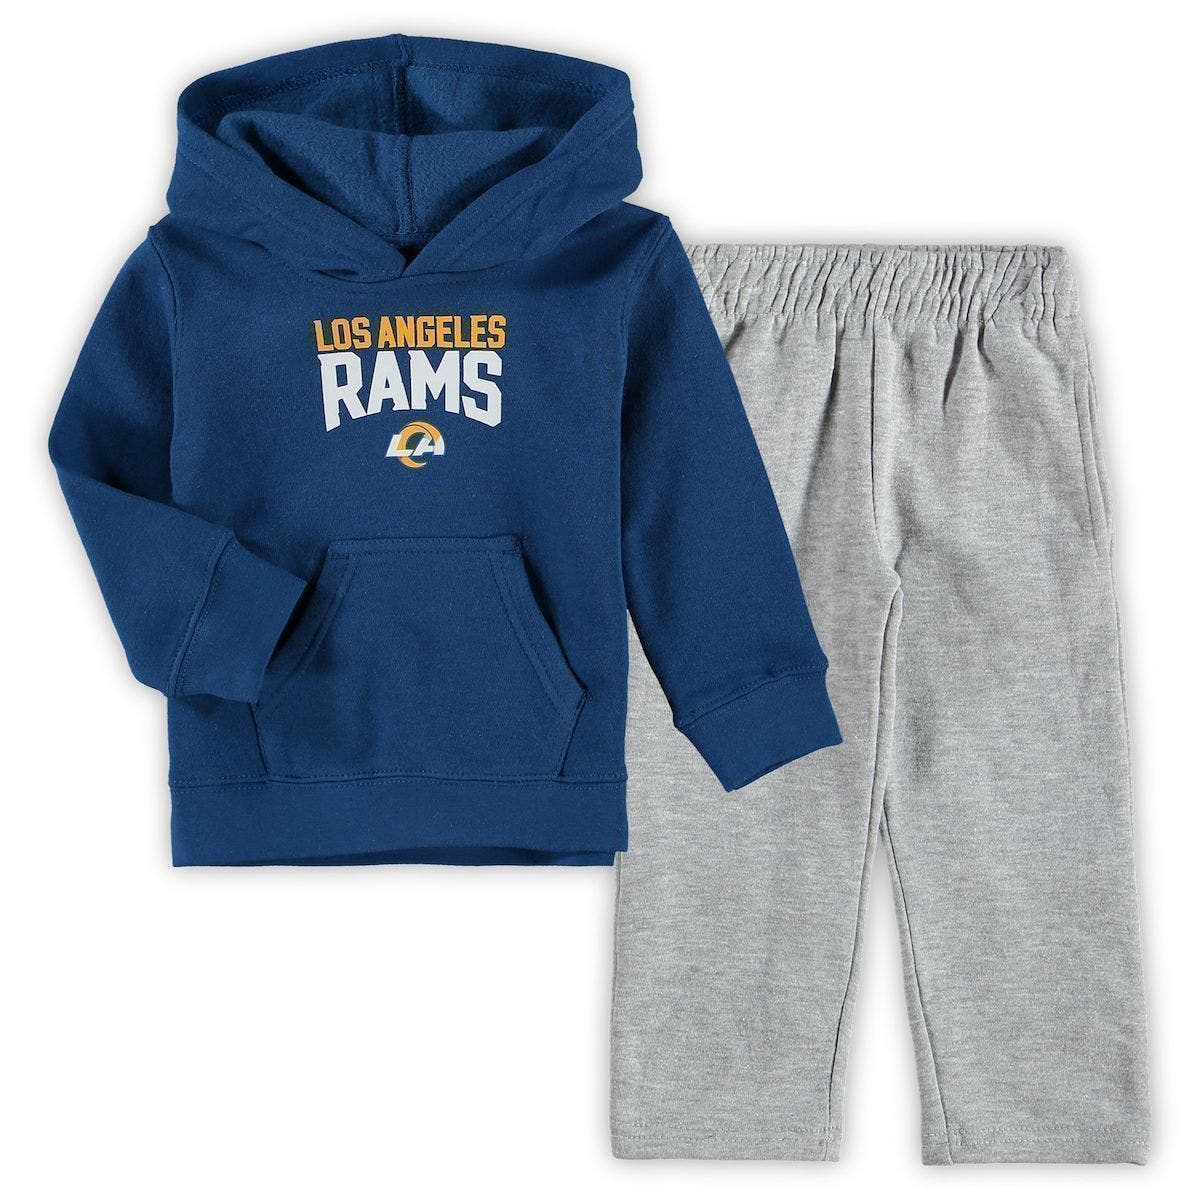 Wes and Willy Girls and Toddlers College Team Cheer Set 